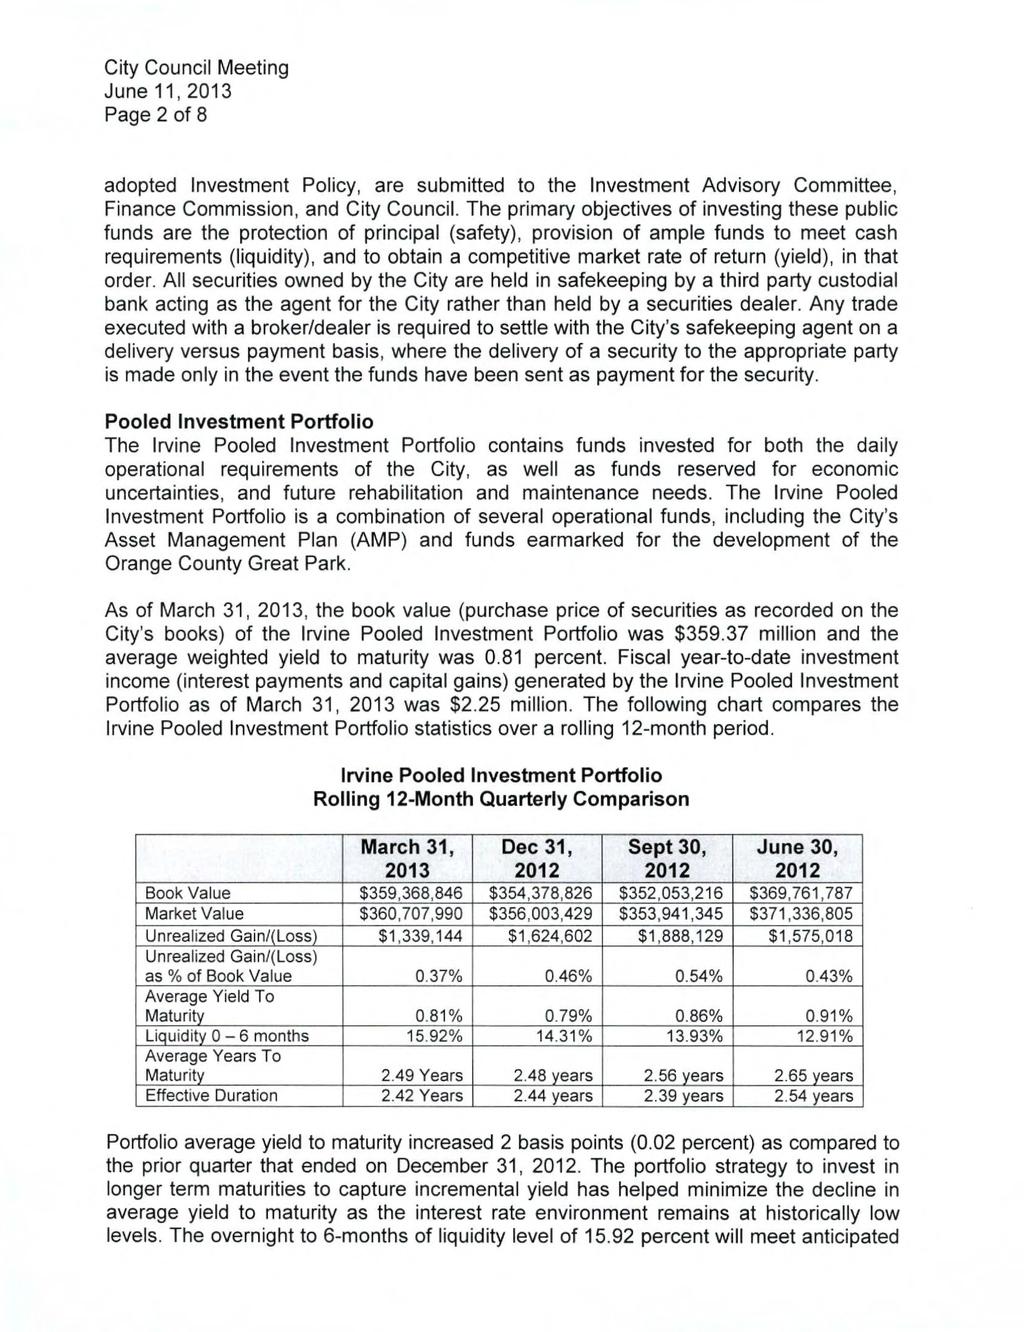 Page 2 of 8 adopted Investment Policy, are submitted to the Investment Advisory Committee, Finance Commission, and City Council.